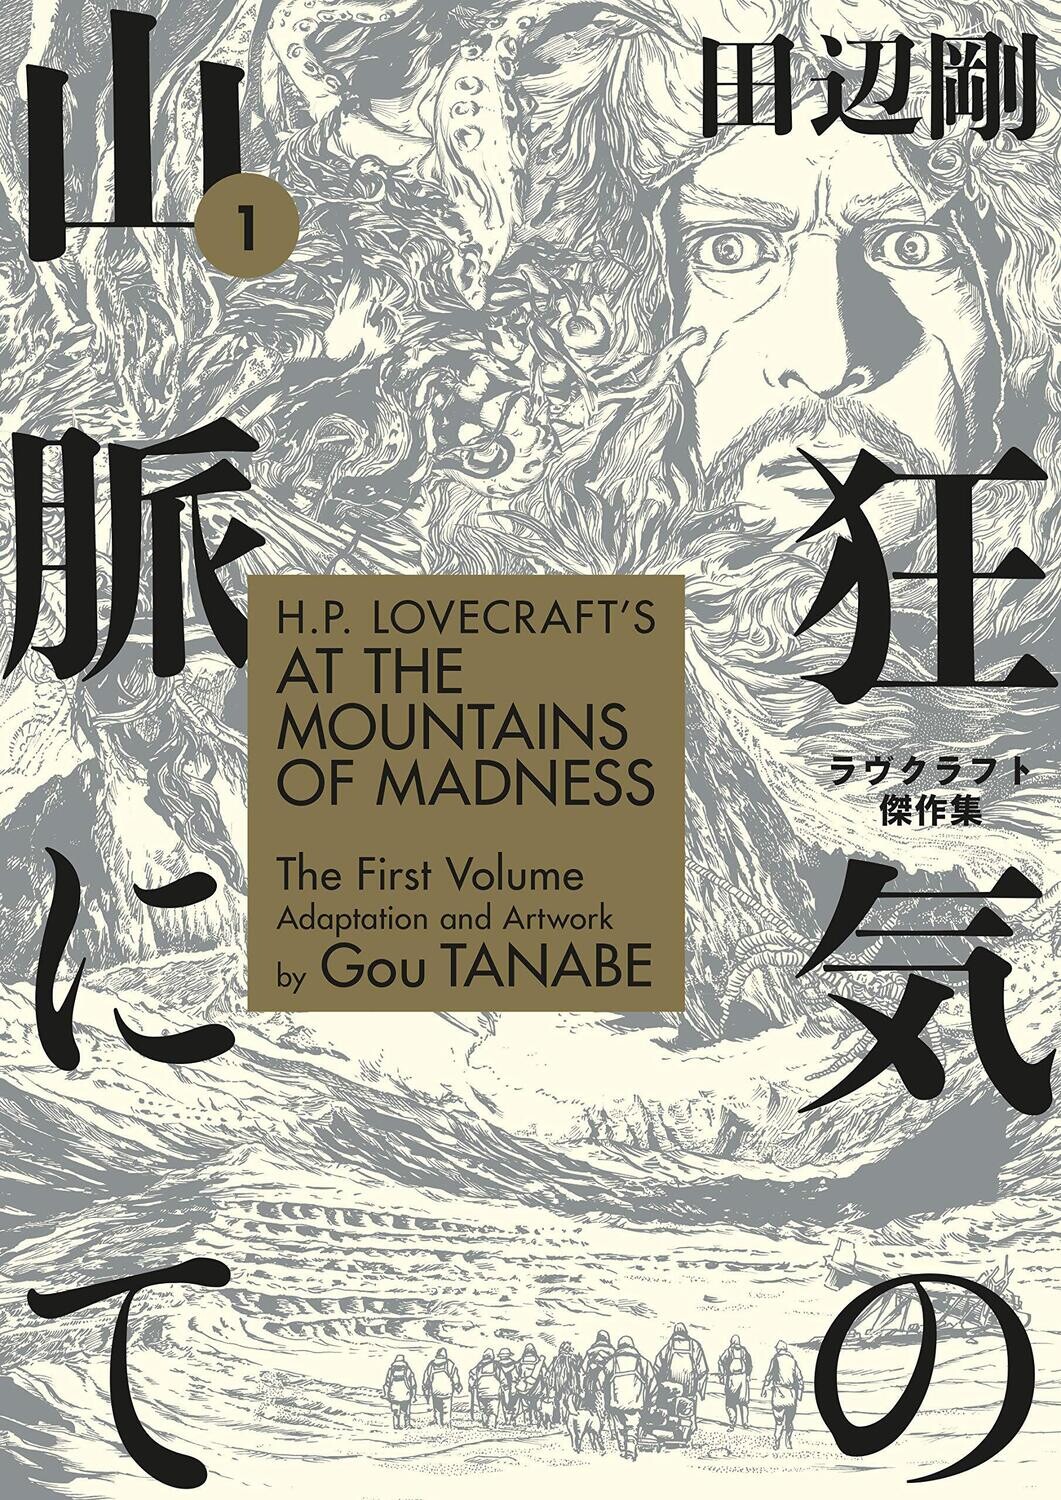 H.P. Lovecraft's At the Mountains of Madness  (Manga) Vol 1 (Paperback, NEW)